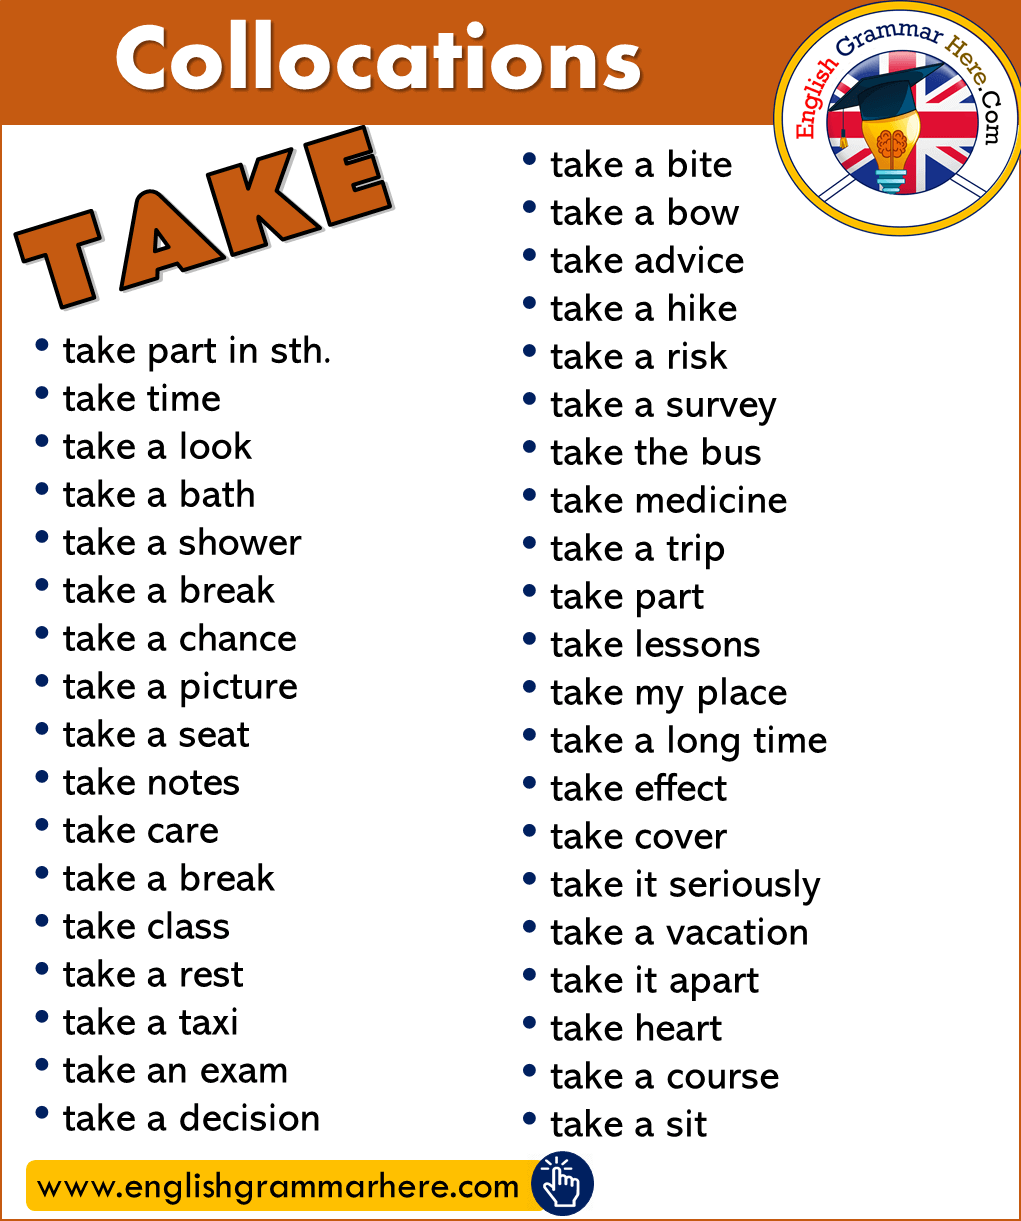 Collocations with TAKE in English